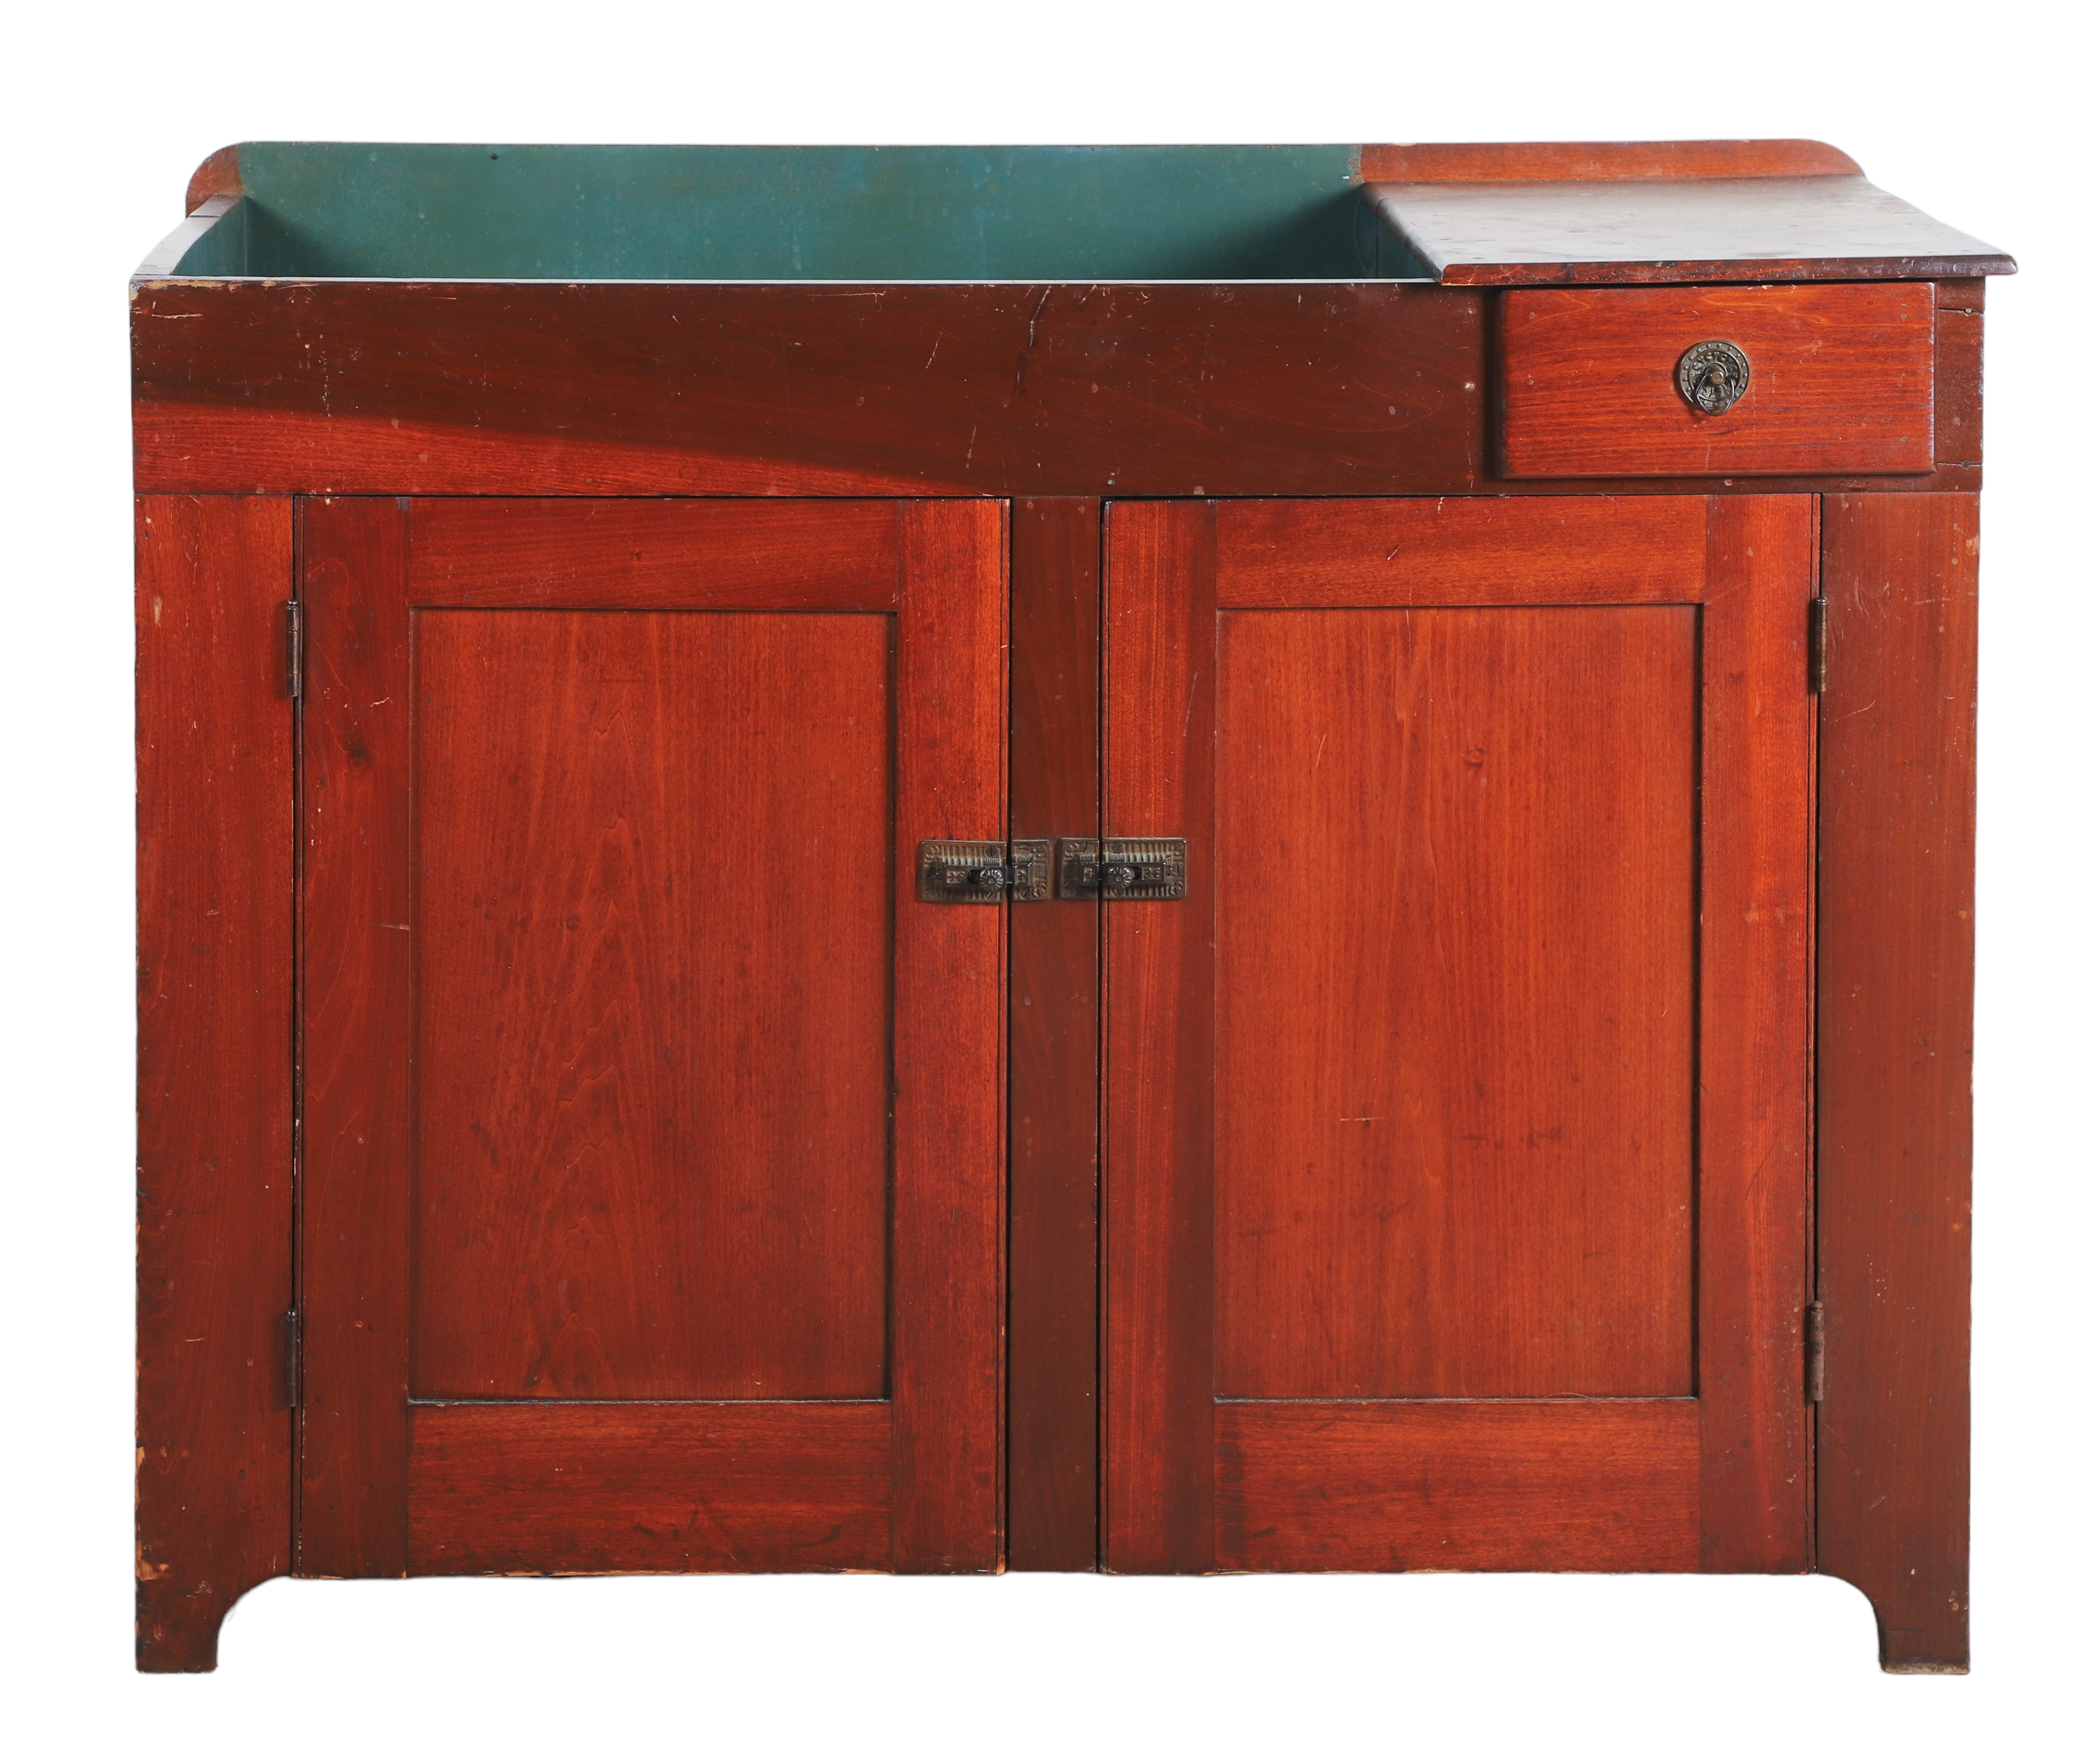 Poplar dry sink, open well with a drawer